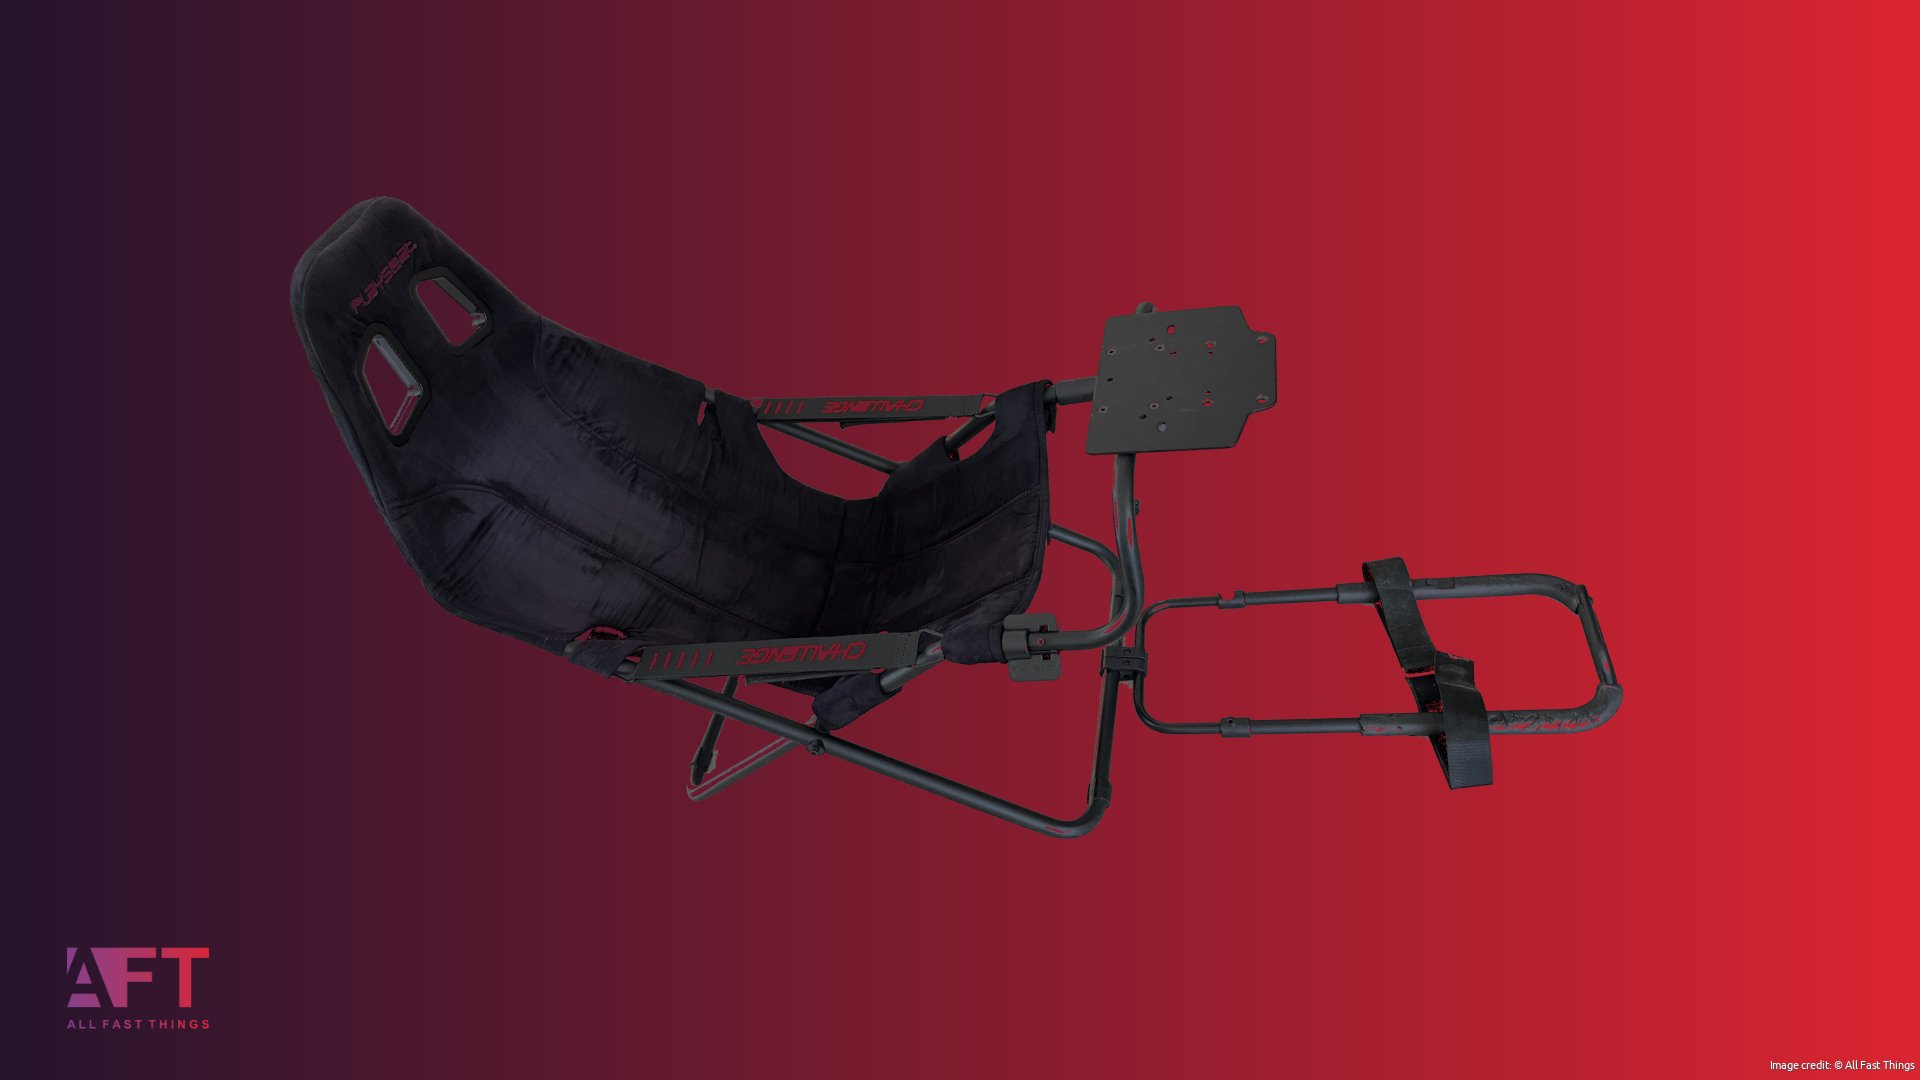 Playseat Challenge Gaming Seat, Unique Foldable Design, Realistic